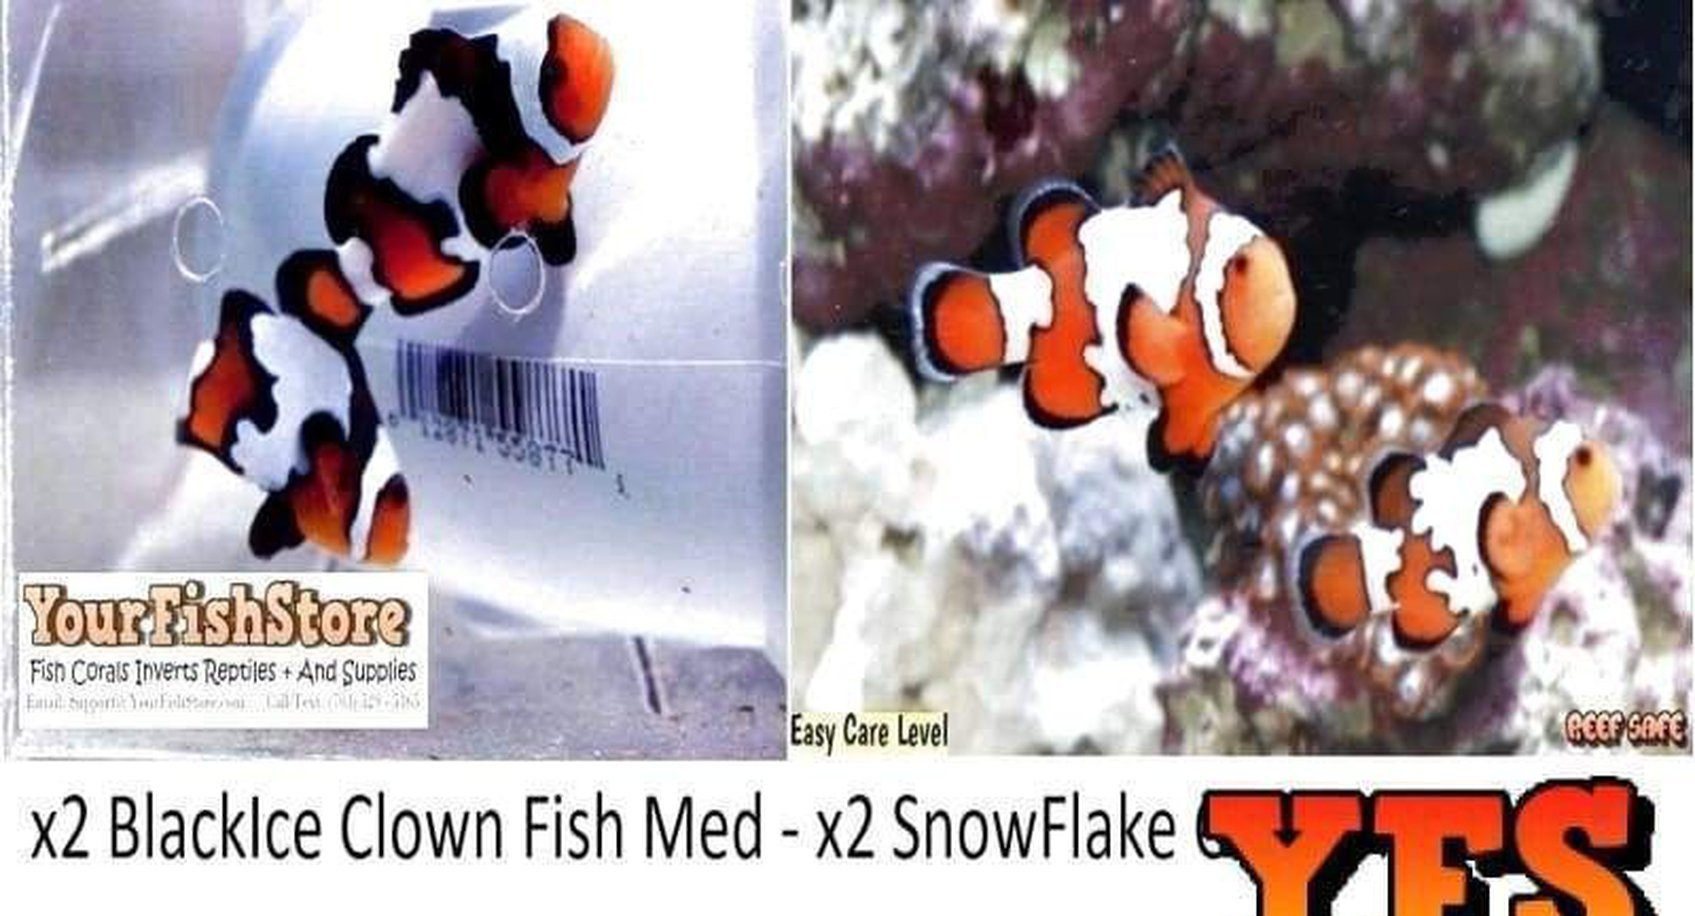 Two (X2) Black Ice Clown Fish - Two (X2) Snowflake Clown Fish Med-marine fish packages-www.YourFishStore.com